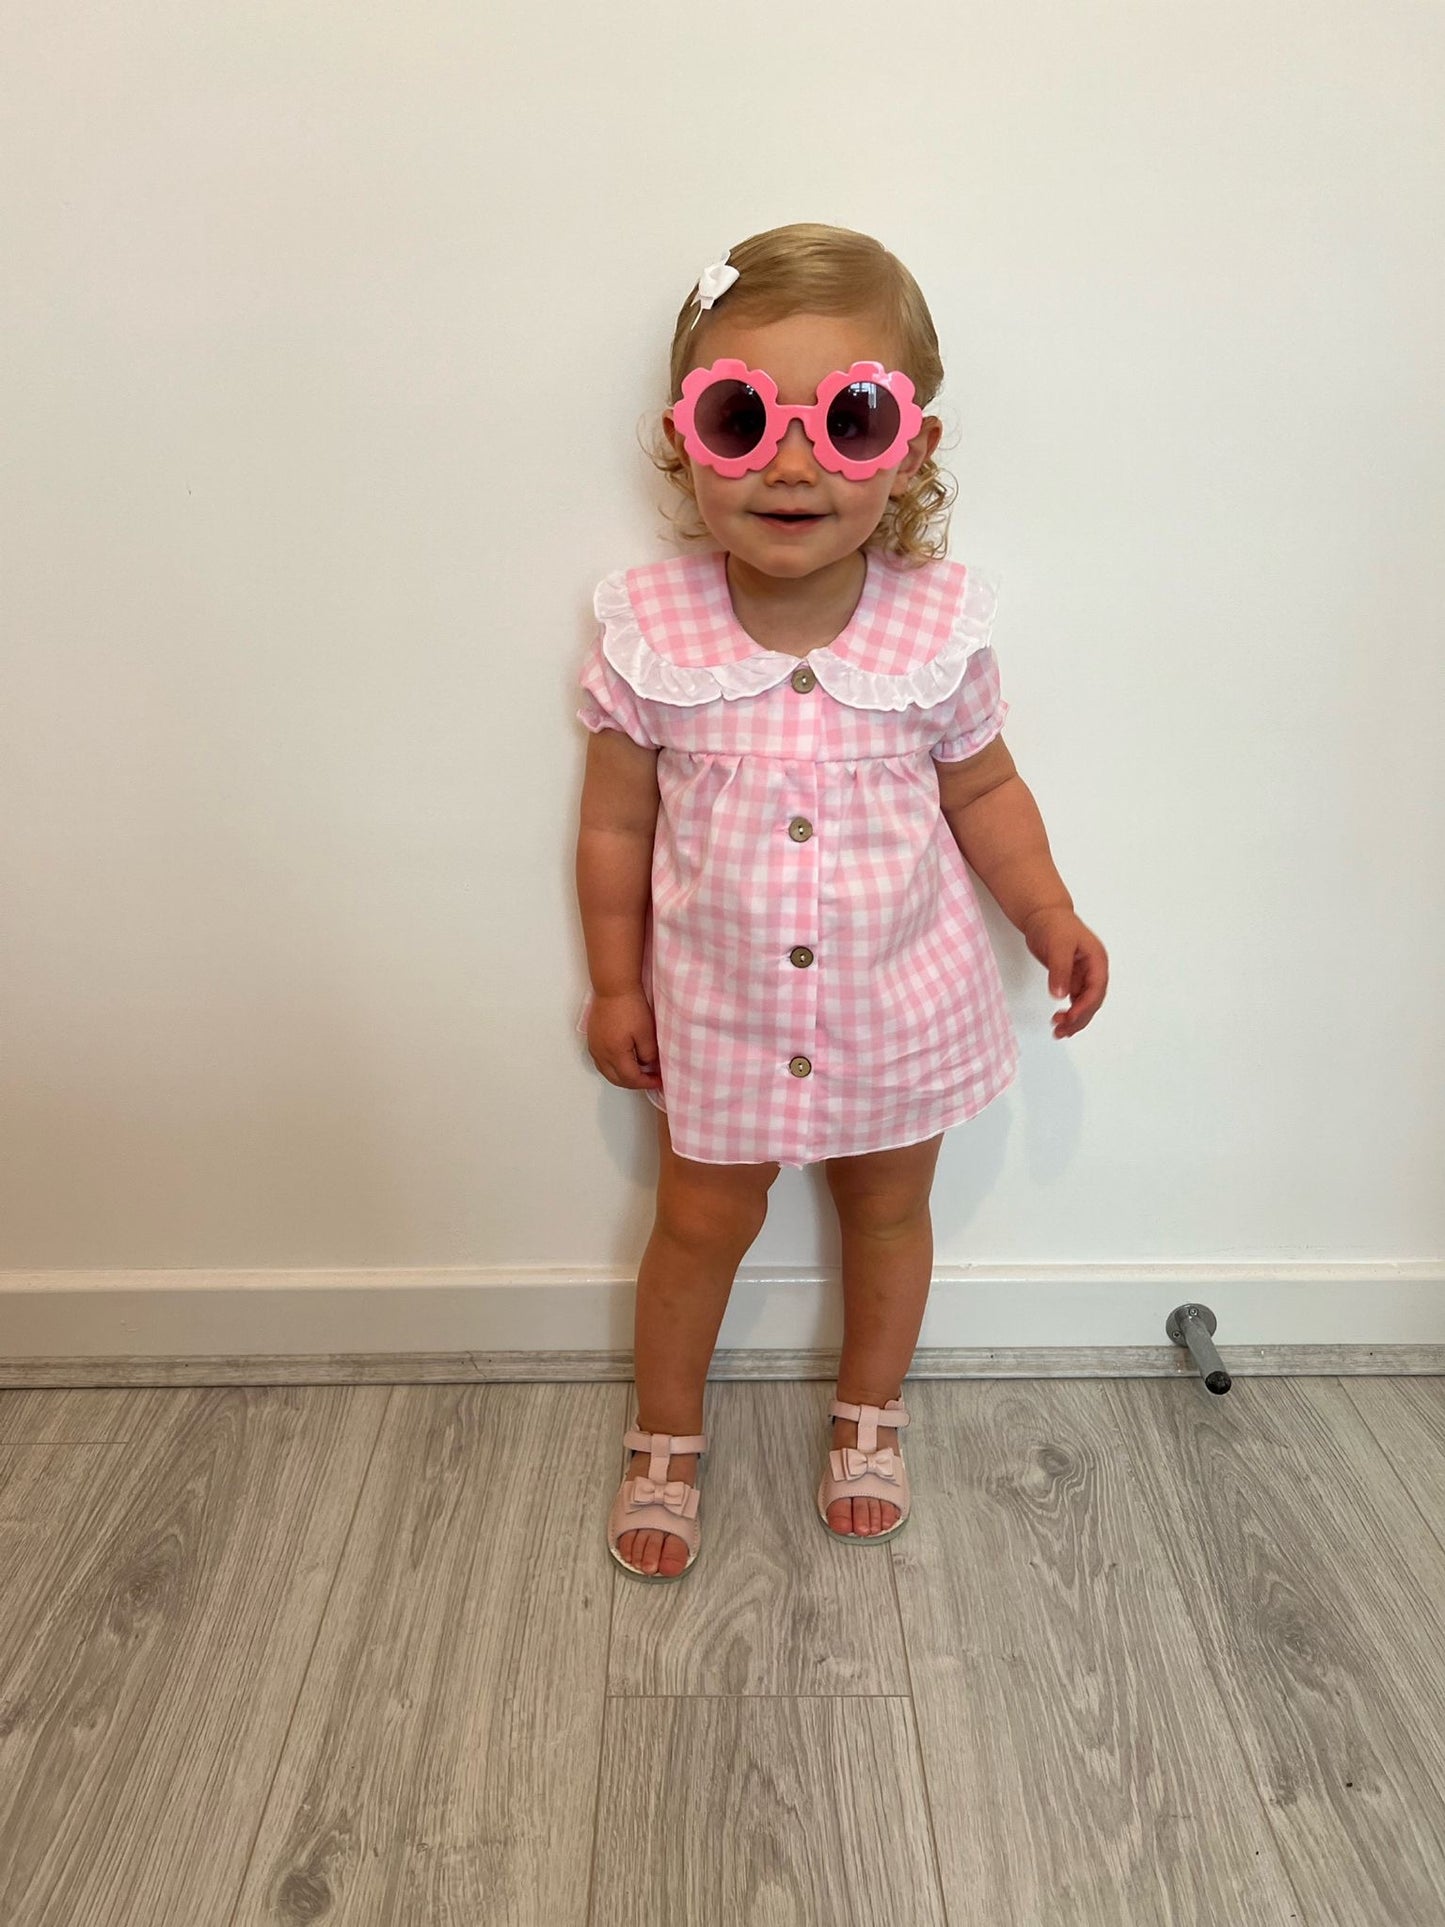 Calamaro Baby Girl Cotton Pink and White Gingham Two Piece